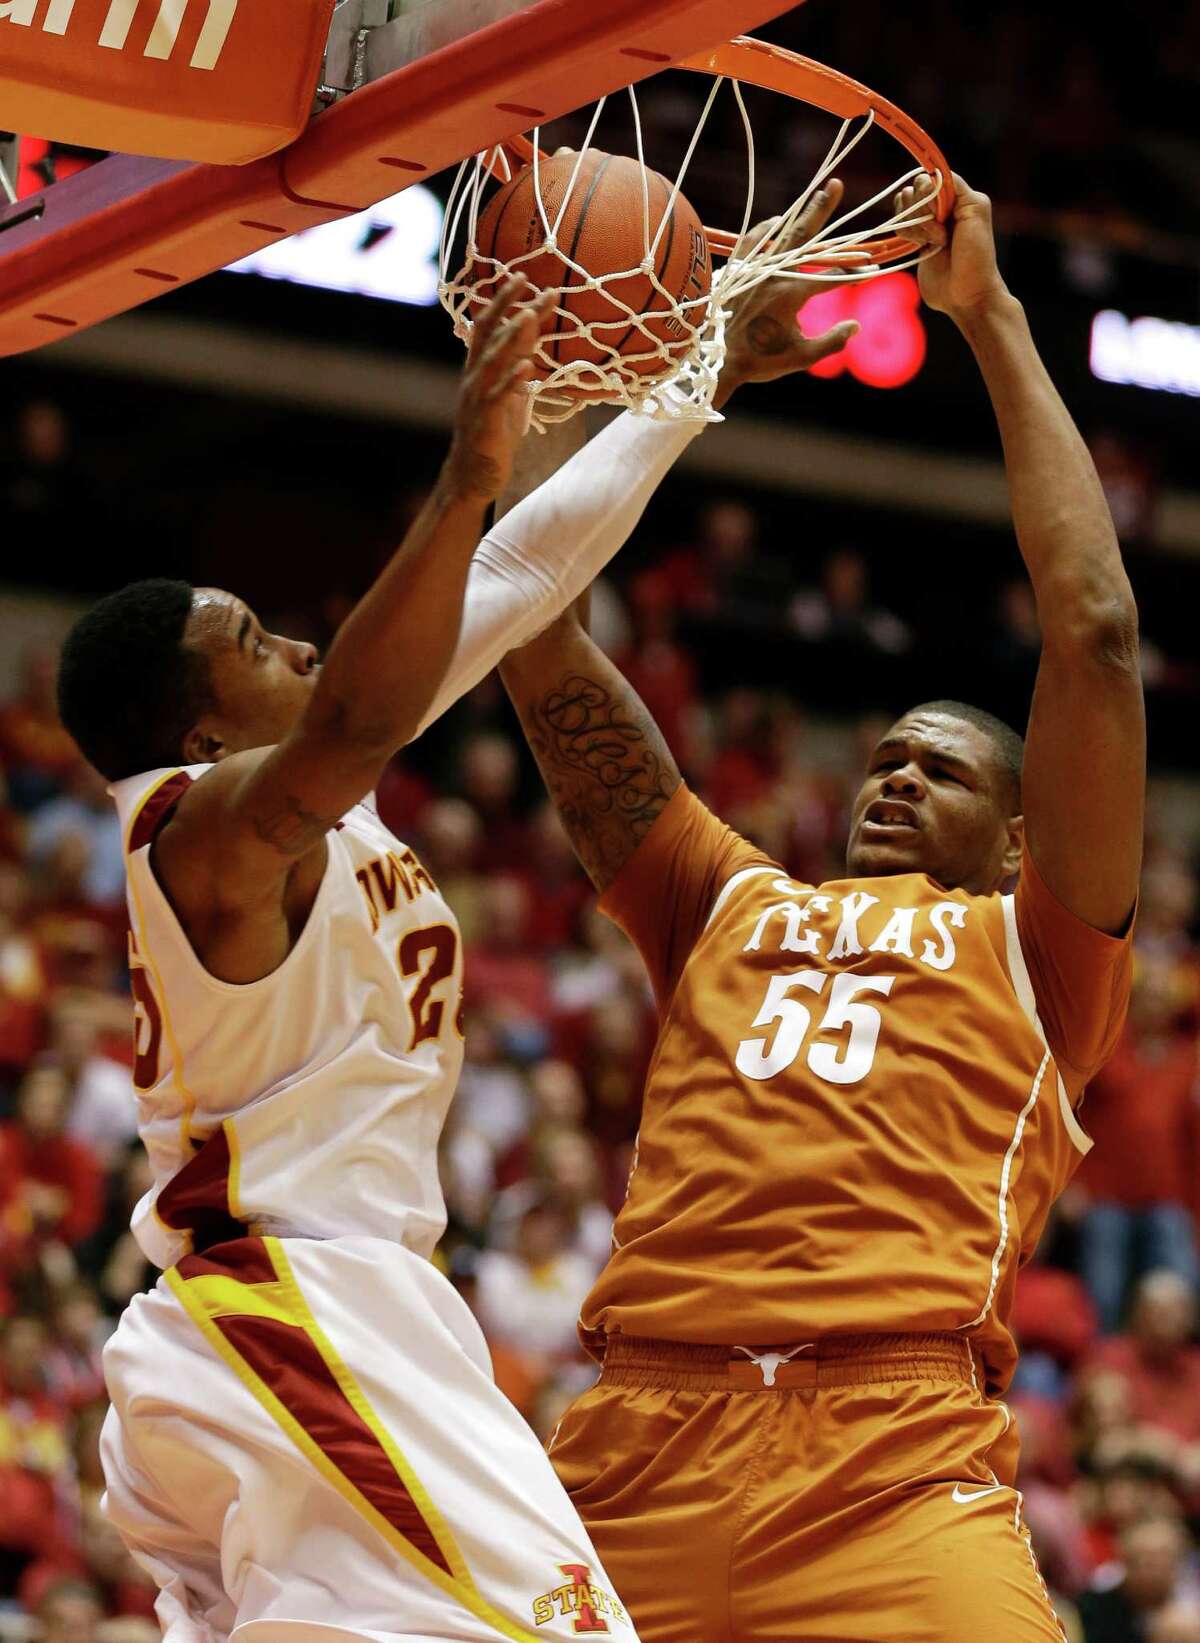 Texas center Cameron Ridley (55) dunks the ball over Iowa State guard Tyrus McGee, left, during the second half of an NCAA college basketball game, Saturday, Jan. 12, 2013, in Ames, Iowa. Iowa State won 82-62. (AP Photo/Charlie Neibergall)